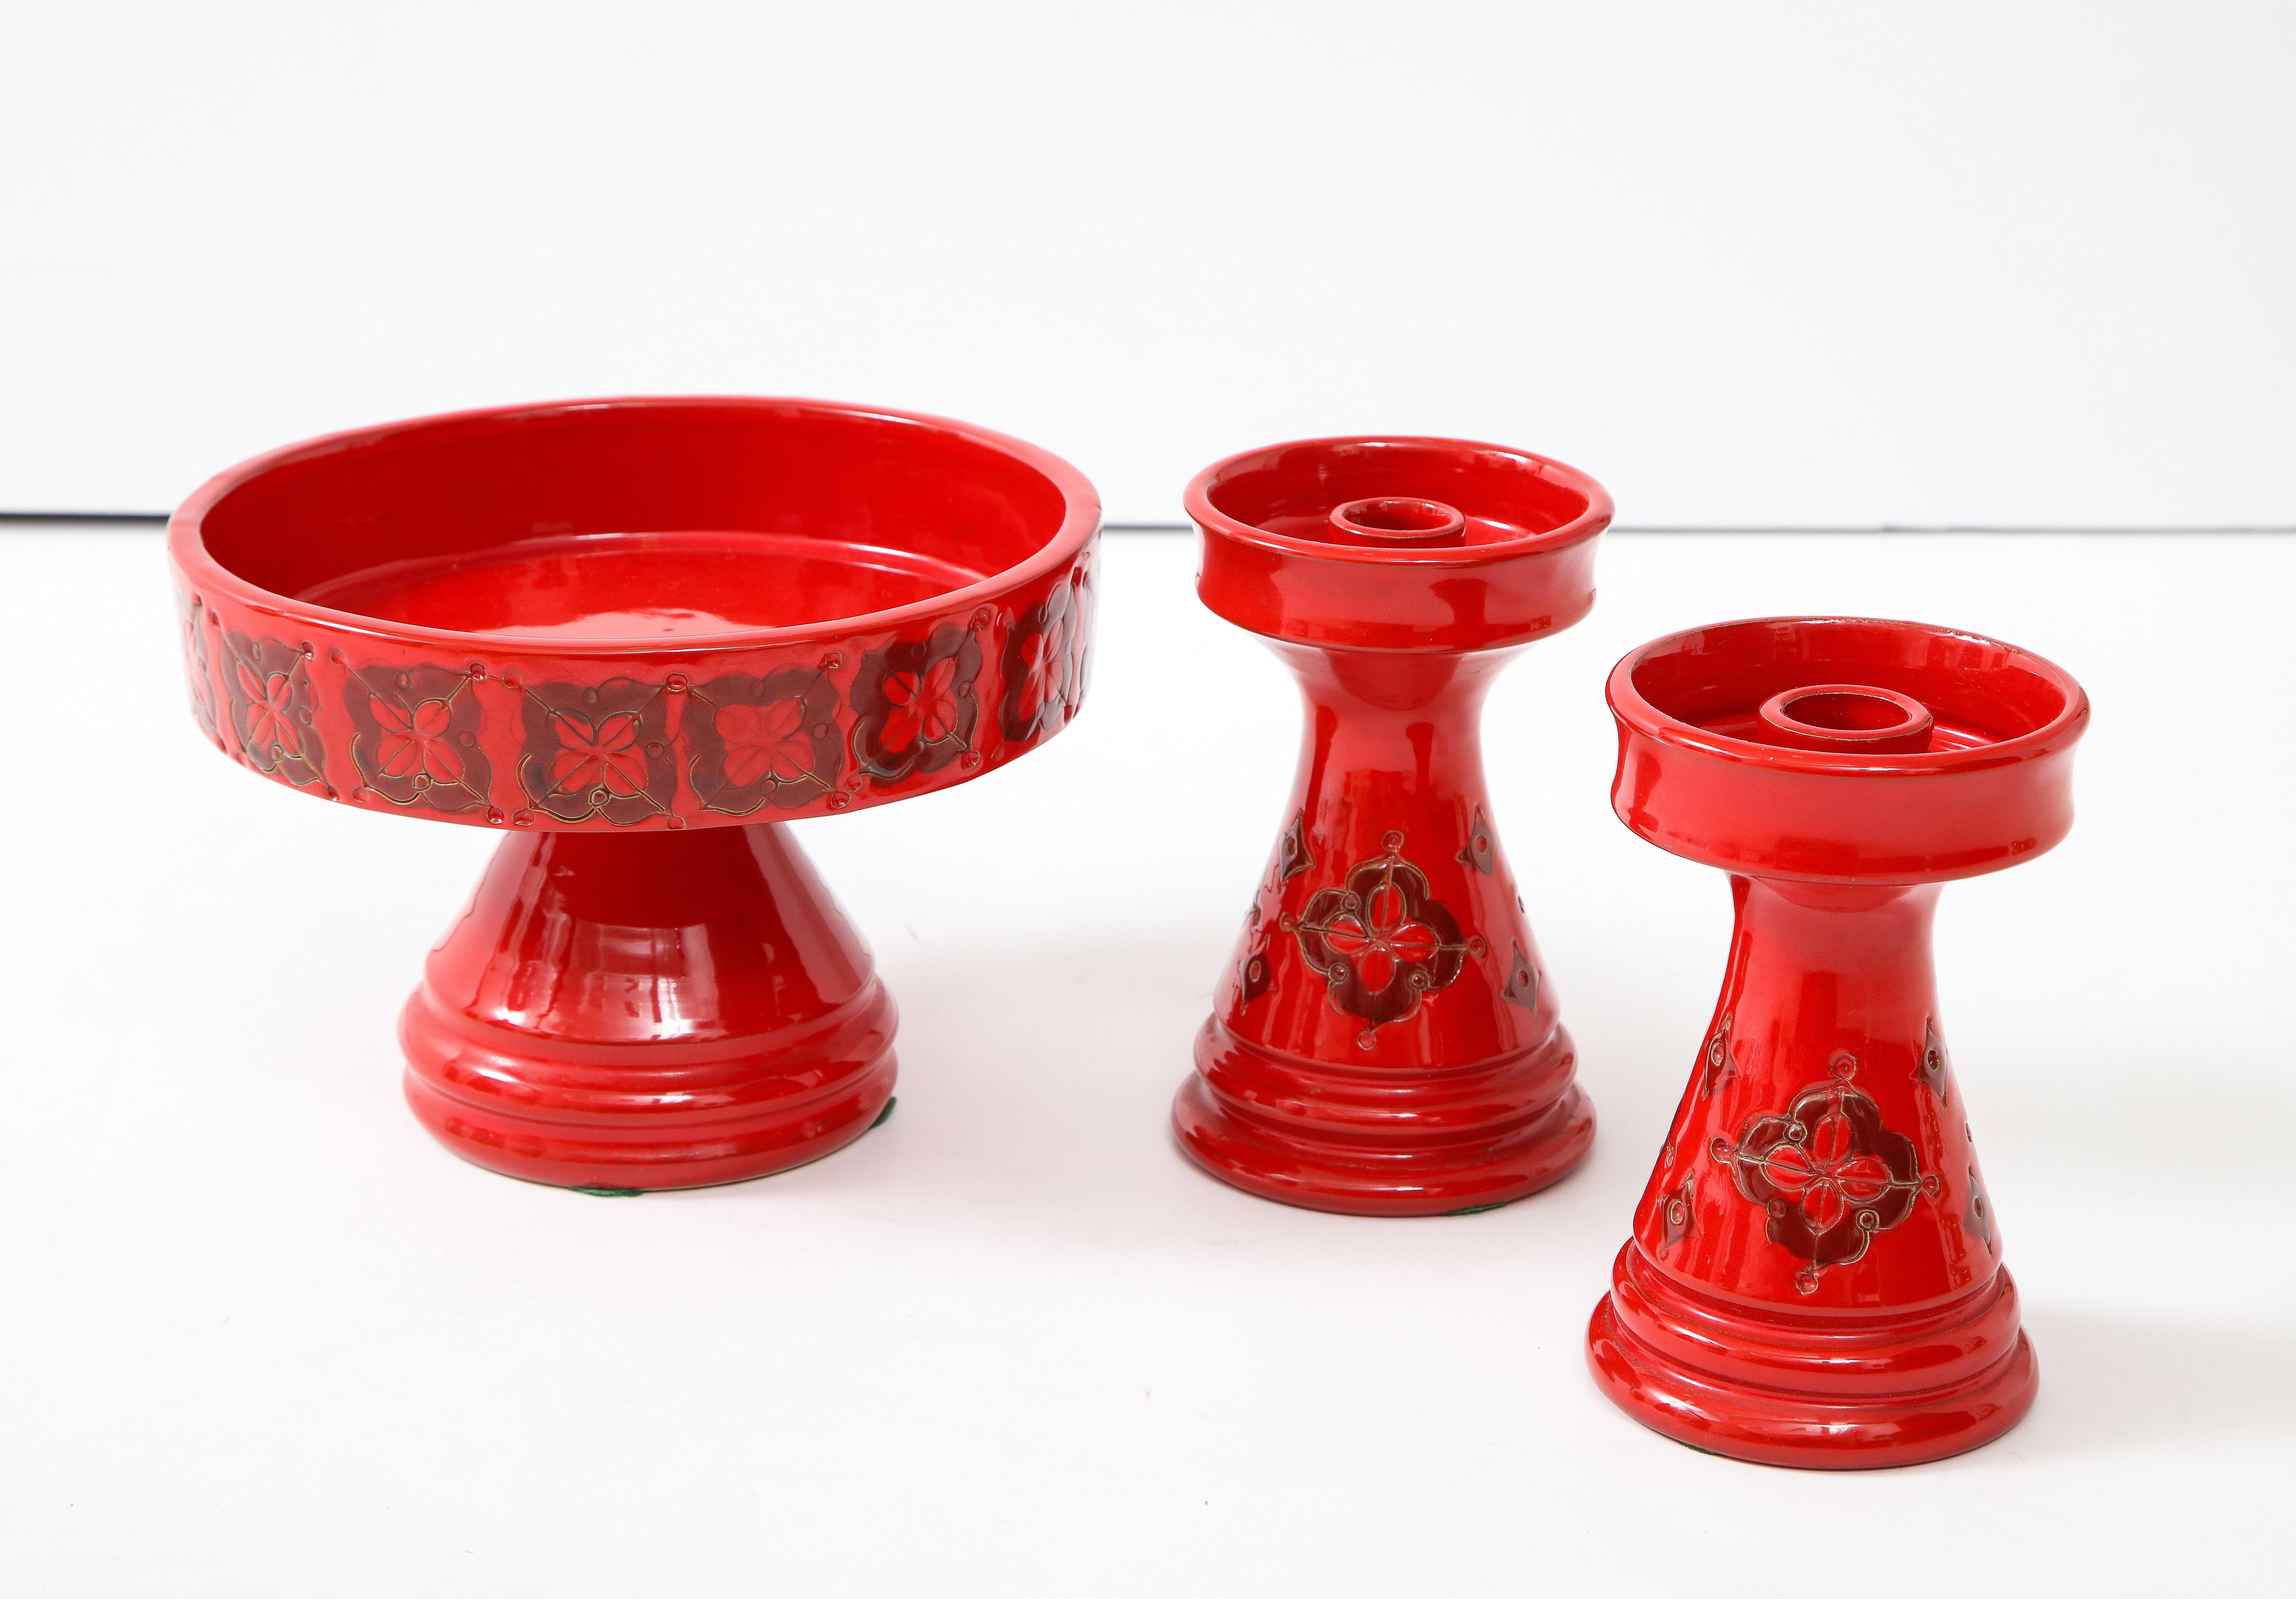 1960s Mid-Century Modern Italian pottery candleholders and decorative bowl by Rosenthal Netter.

Bowl measurements: Width 8